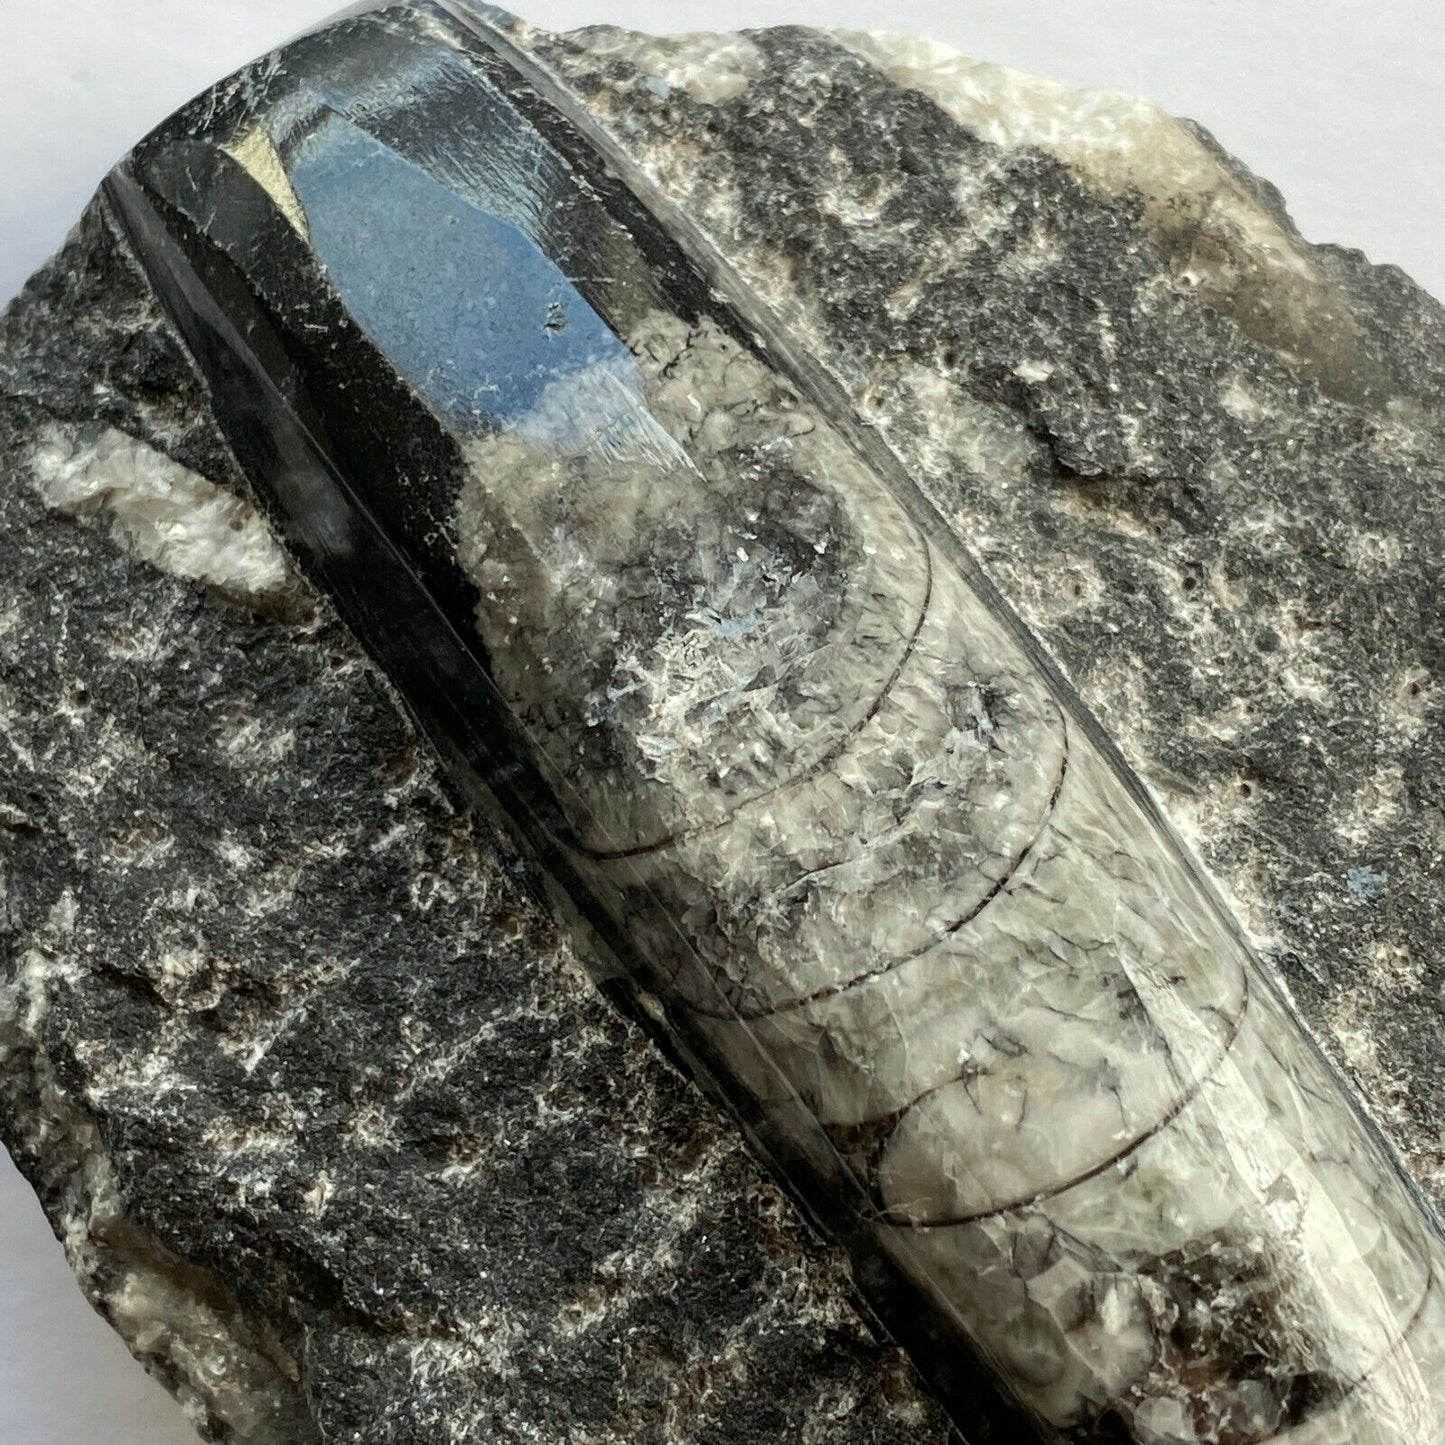 ORTHOCERAS DEVONIAN FOSSIL FROM MOROCCO 536g  MF1405